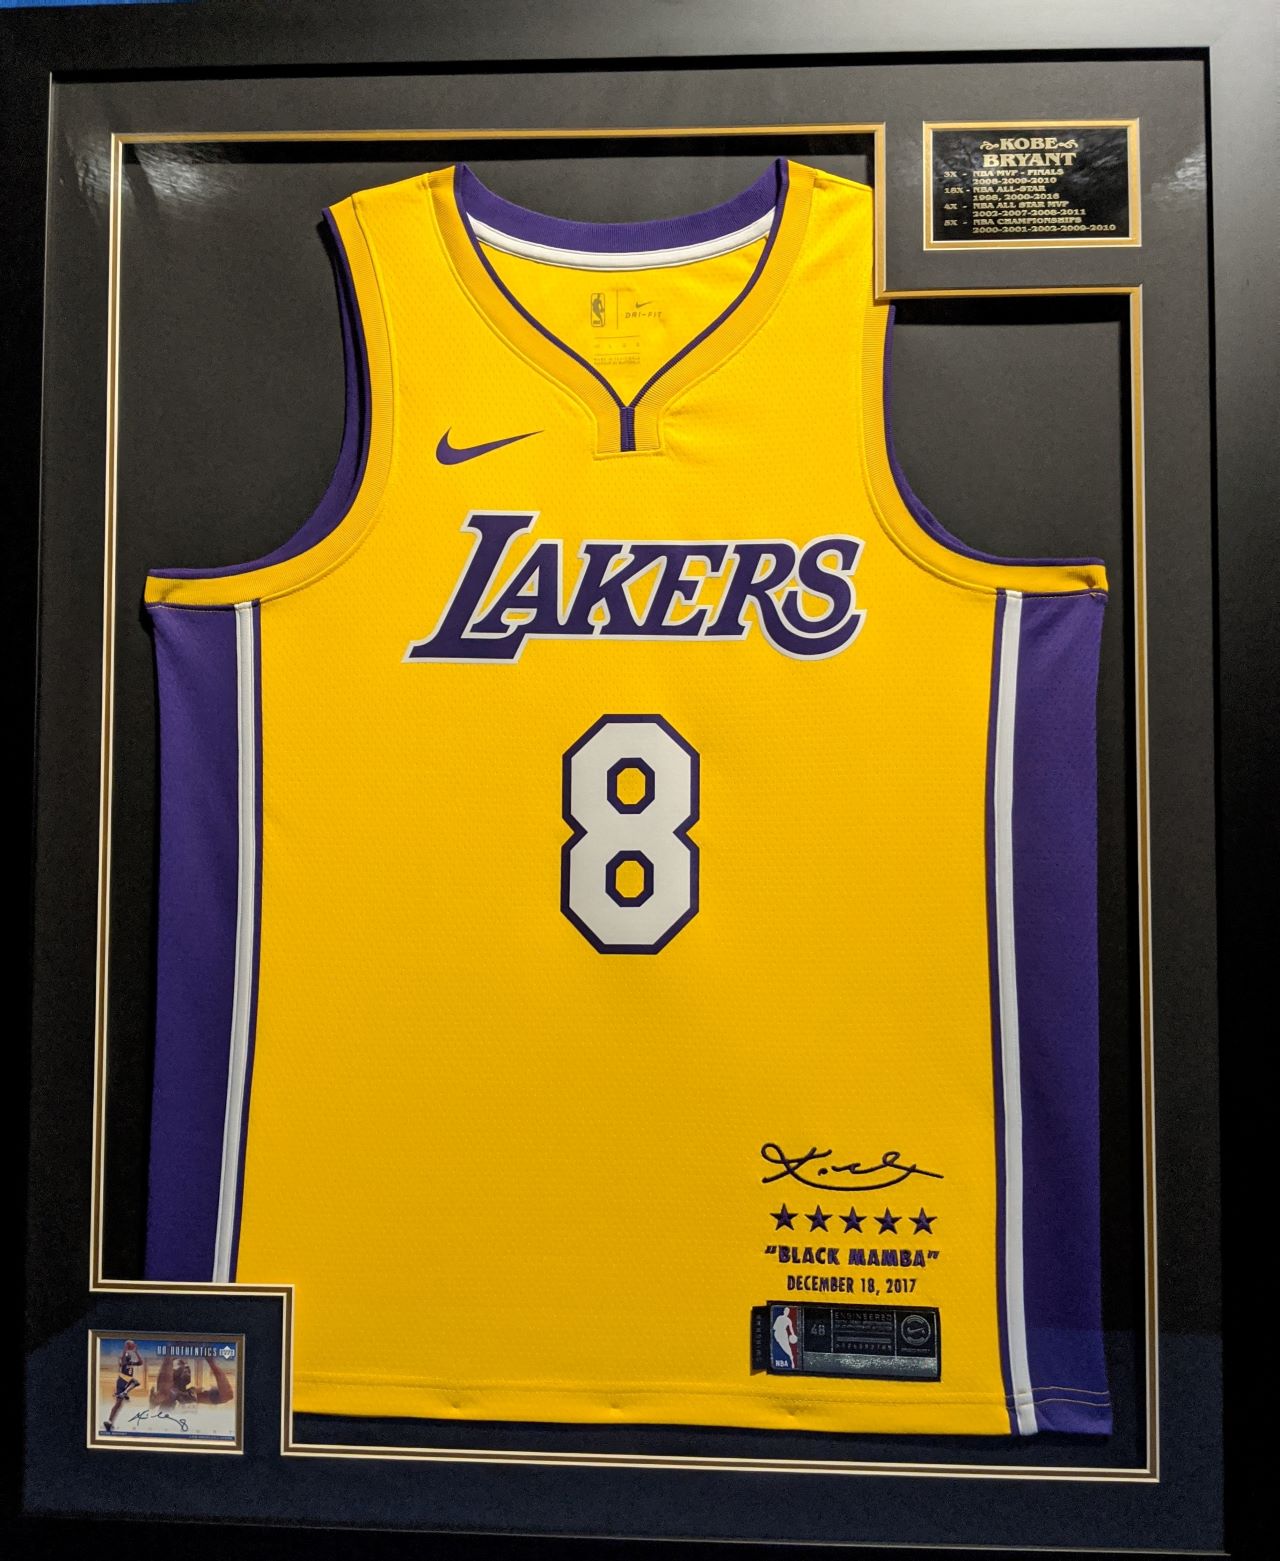 lakers 8 jersey